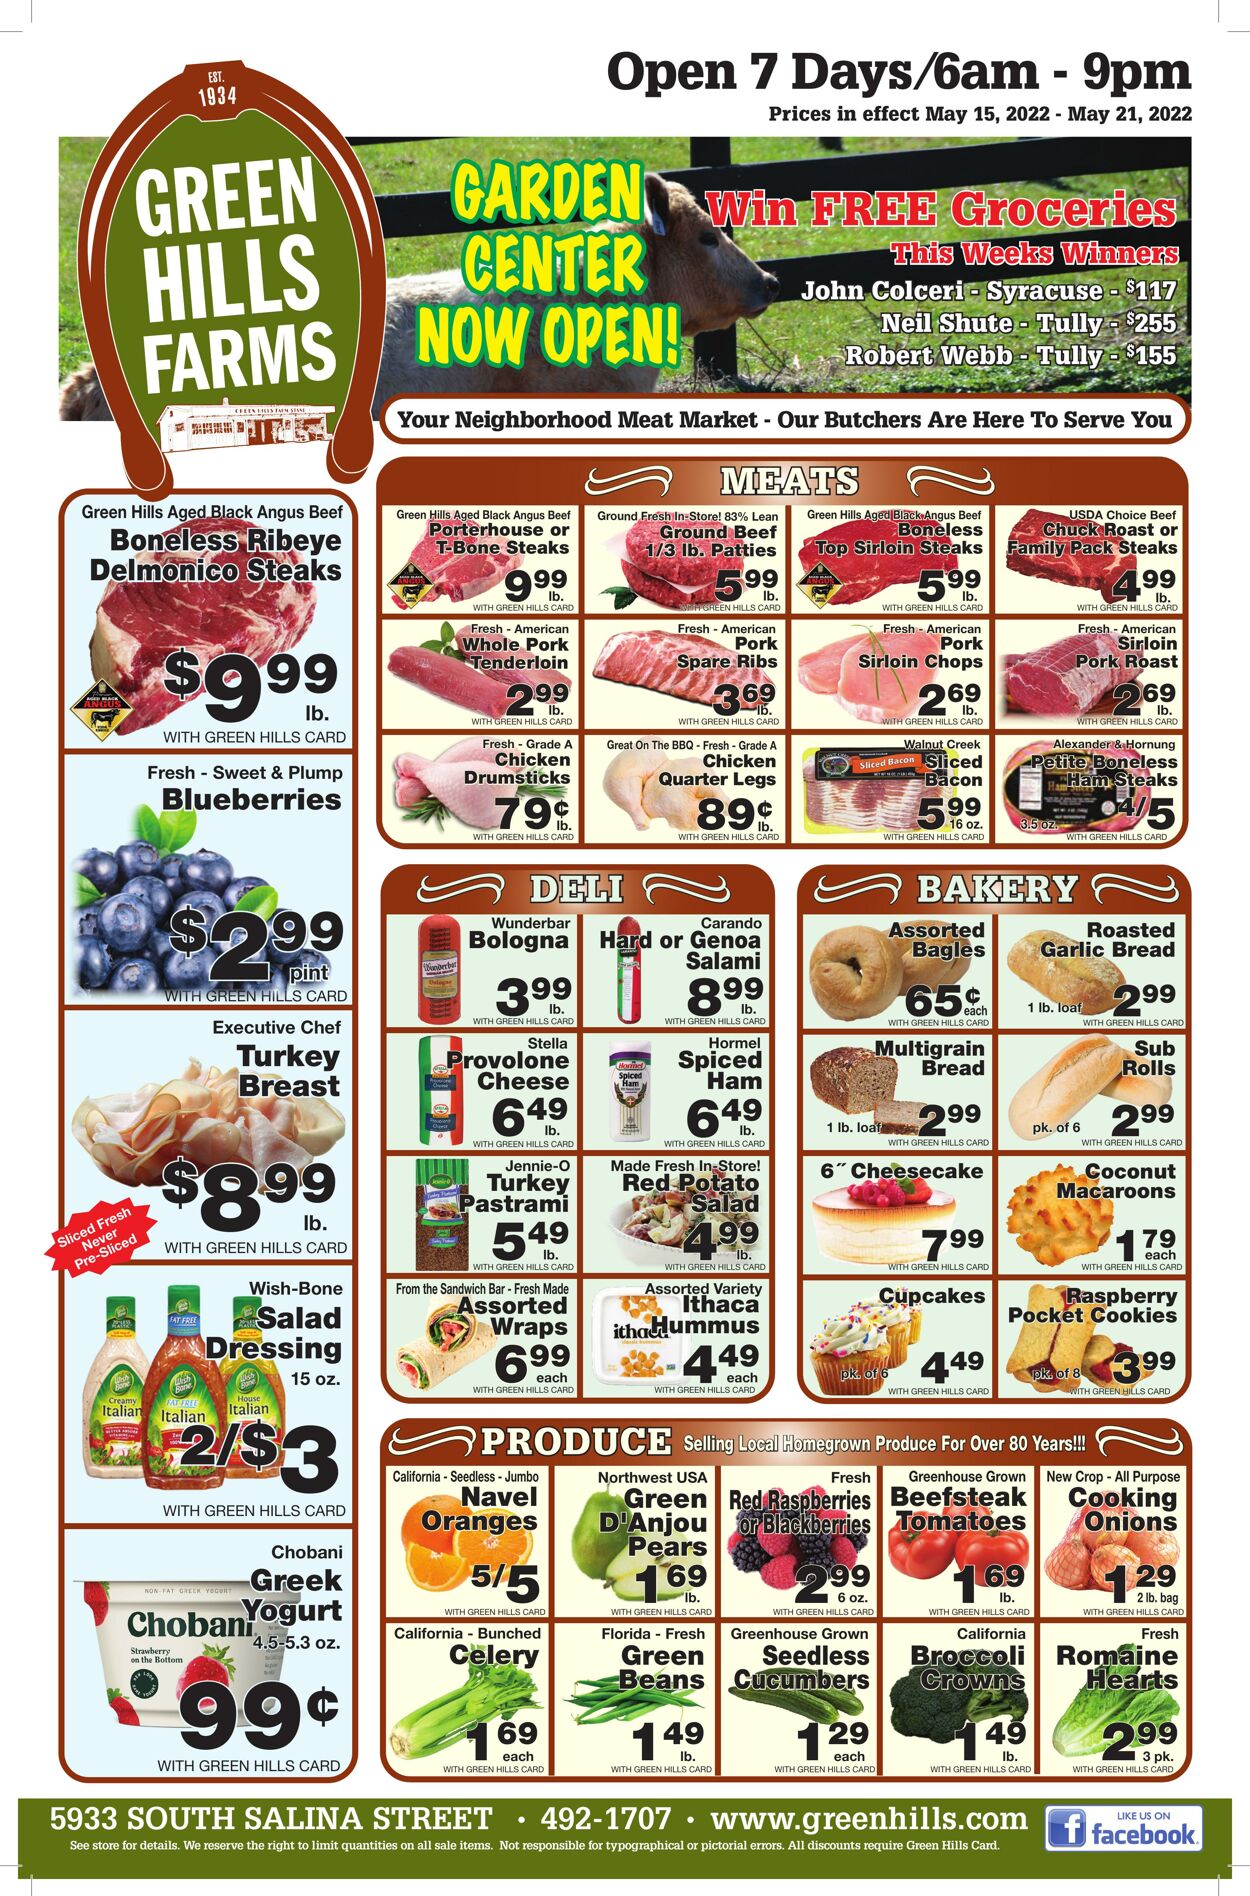 Green Hills Farms Promotional weekly ads